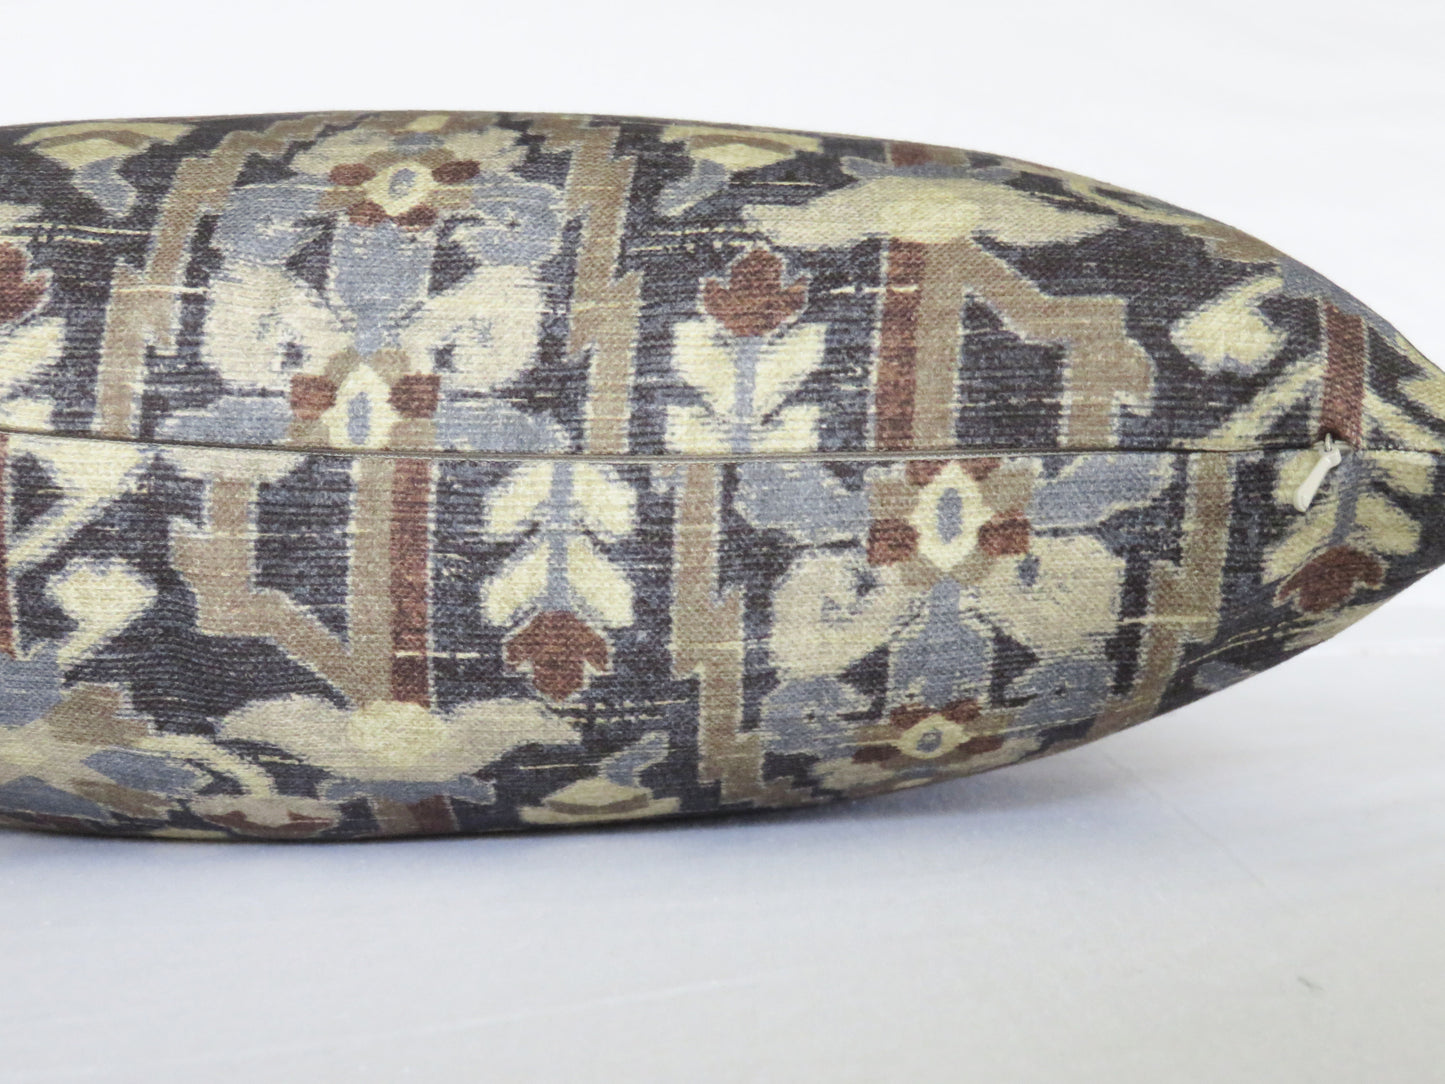 brown and grey geometric pillow cover made from P kaufmann Pasha Teak cotton fabric